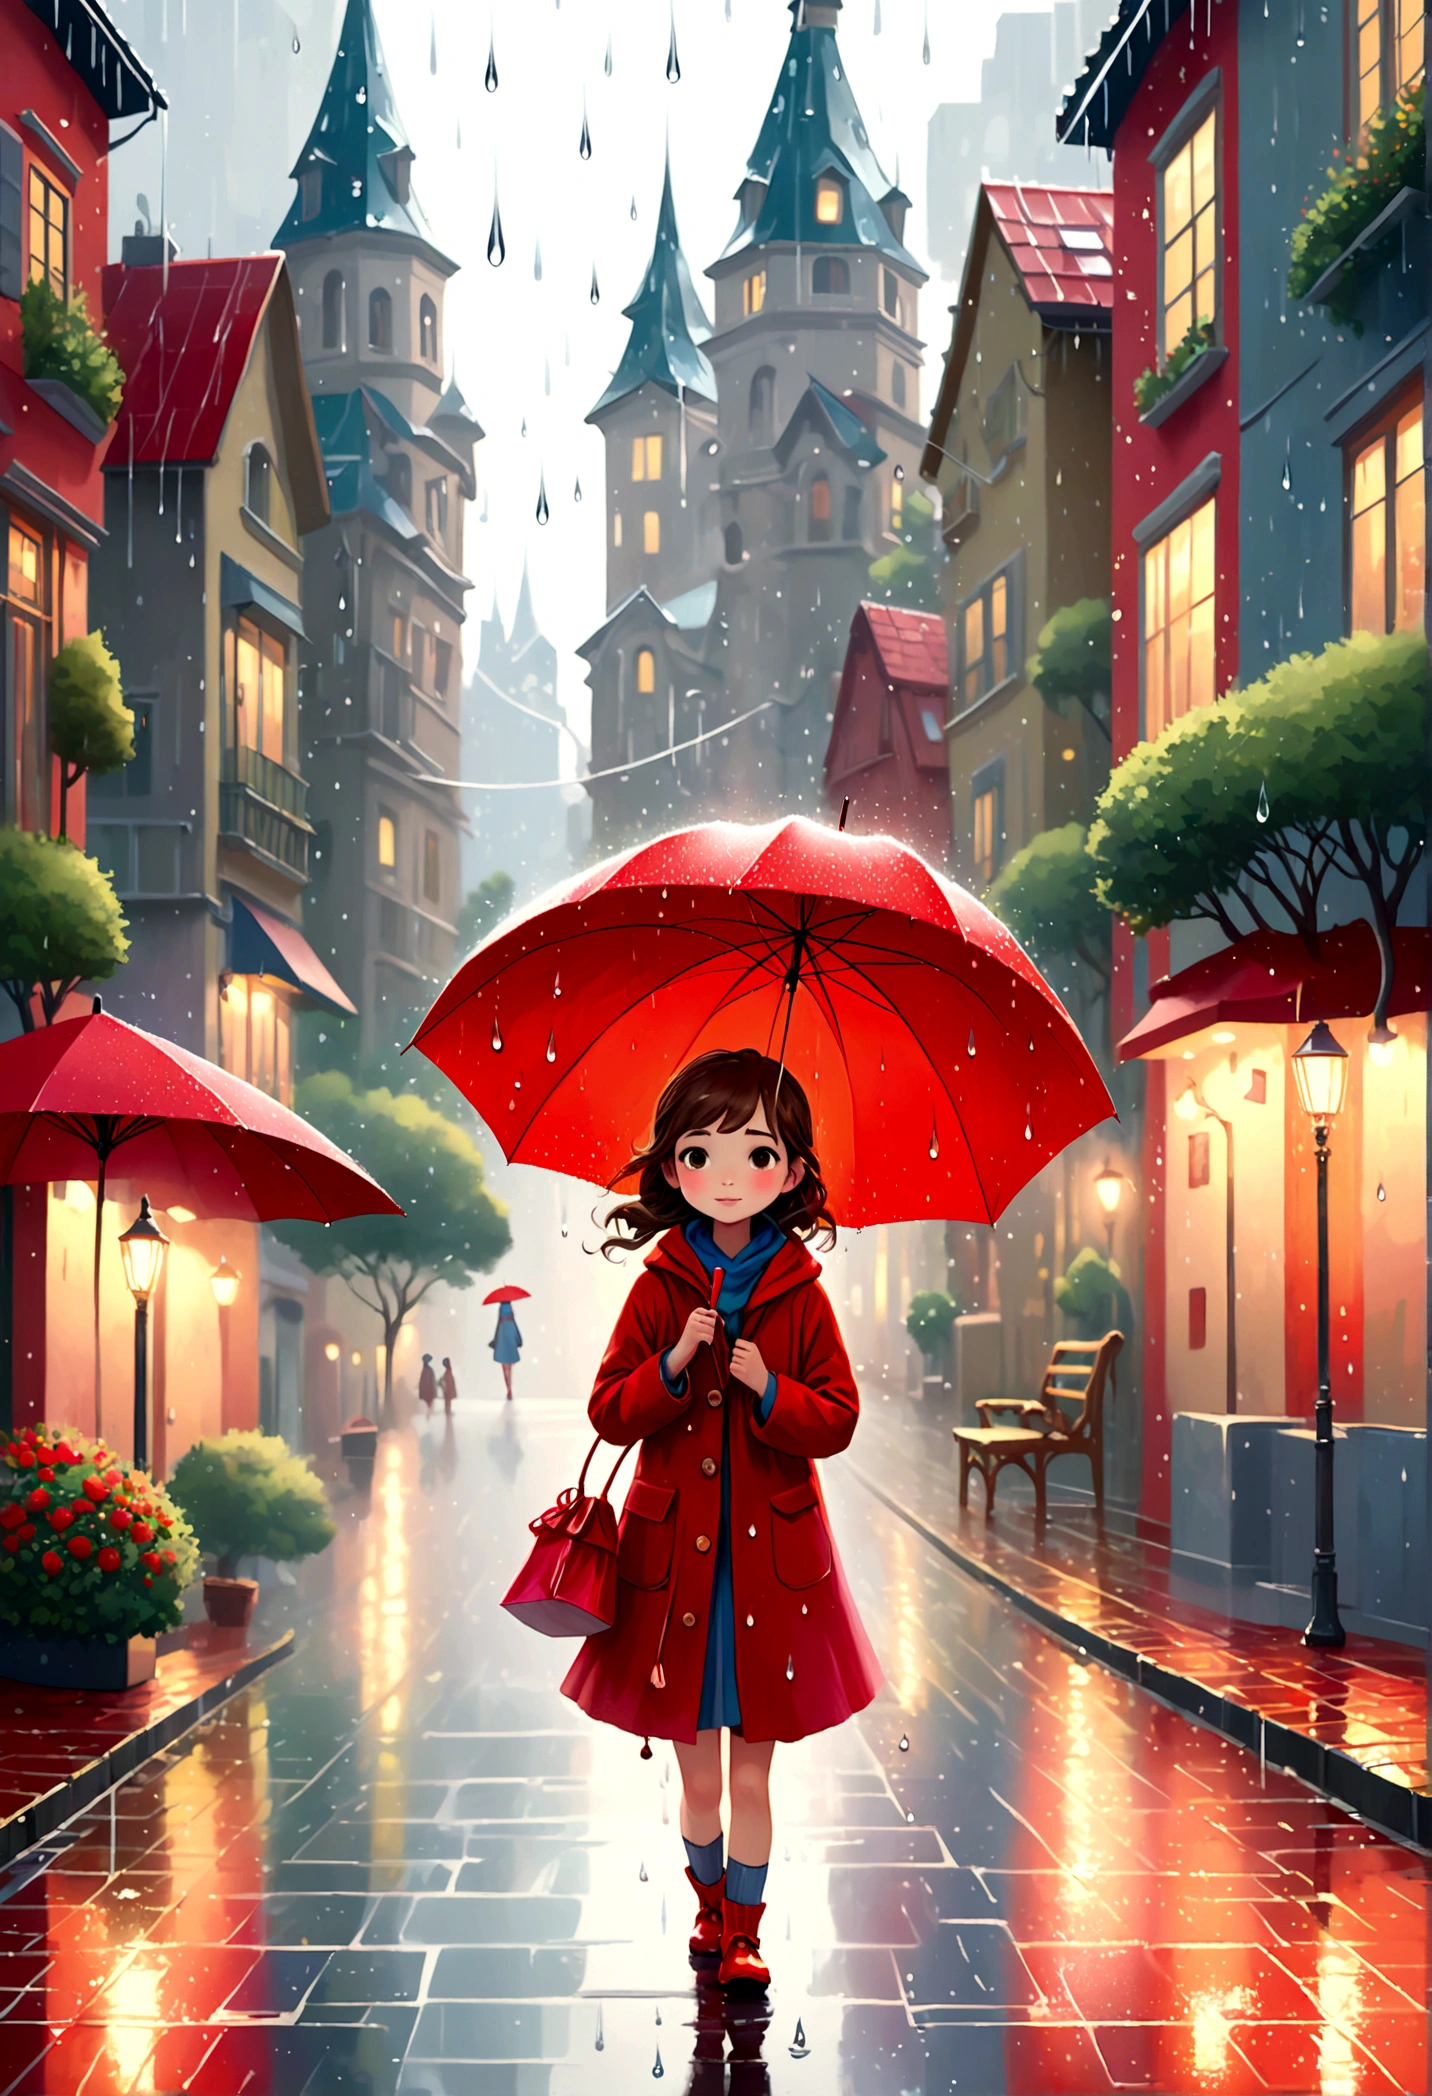 Cute illustration: Landscape,Street corner on a rainy day,A landscape that looks like an illustration from a picture book,Rich in emotion,Cute girl with a red umbrella,create an artistic background,Add a drop pattern to the background,The streets are fancy, like a fairy tale,This is a cute illustration like a dream.,Please blur the lines of the droplet pattern to create an artistic expression.,Intricate details,Wide range of colors,artwork,rendering,(masterpiece:1.3),(highest quality:1.4),(Super detailed:1.5),High resolution,Very detailed,unity 8k wallpaper